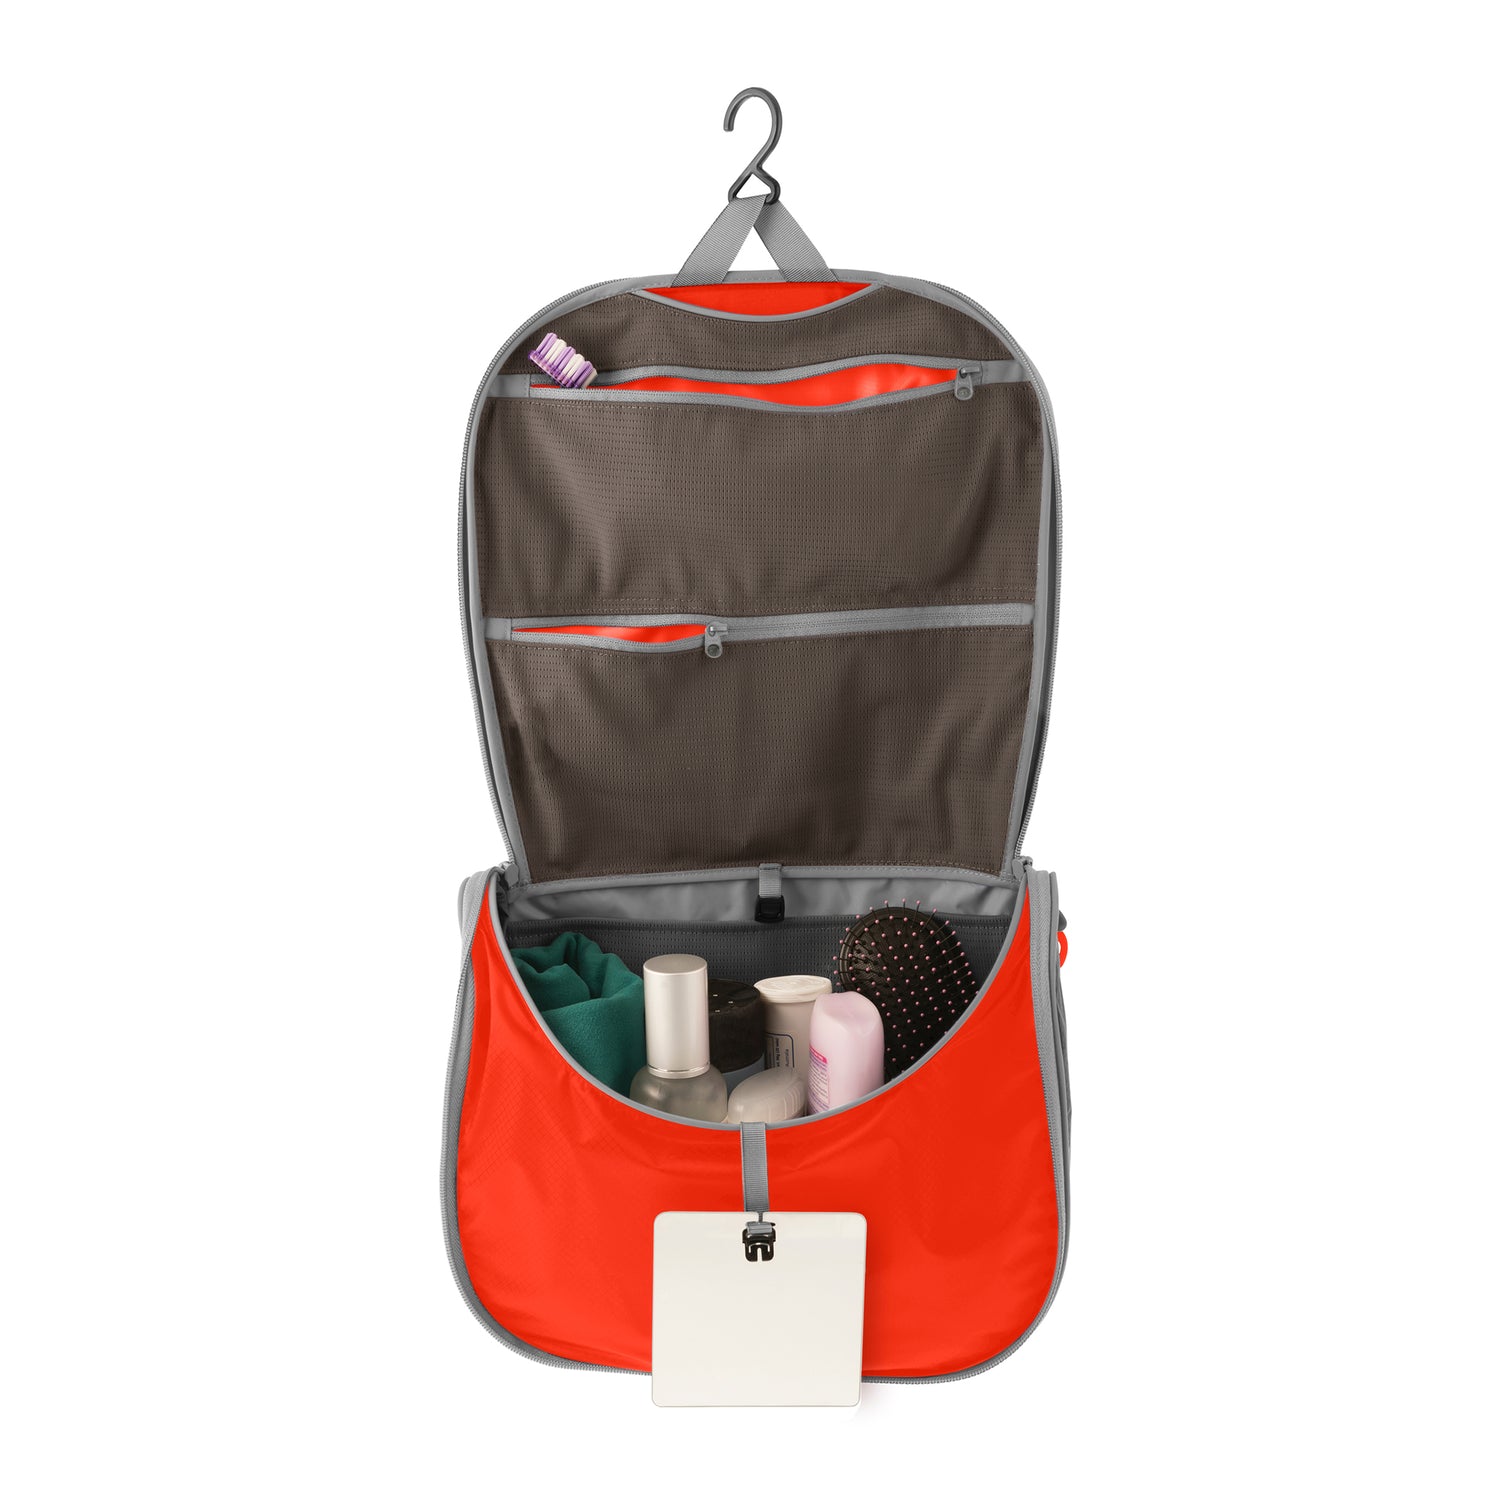 Sea to Summit Hanging Toiletry Bag Review